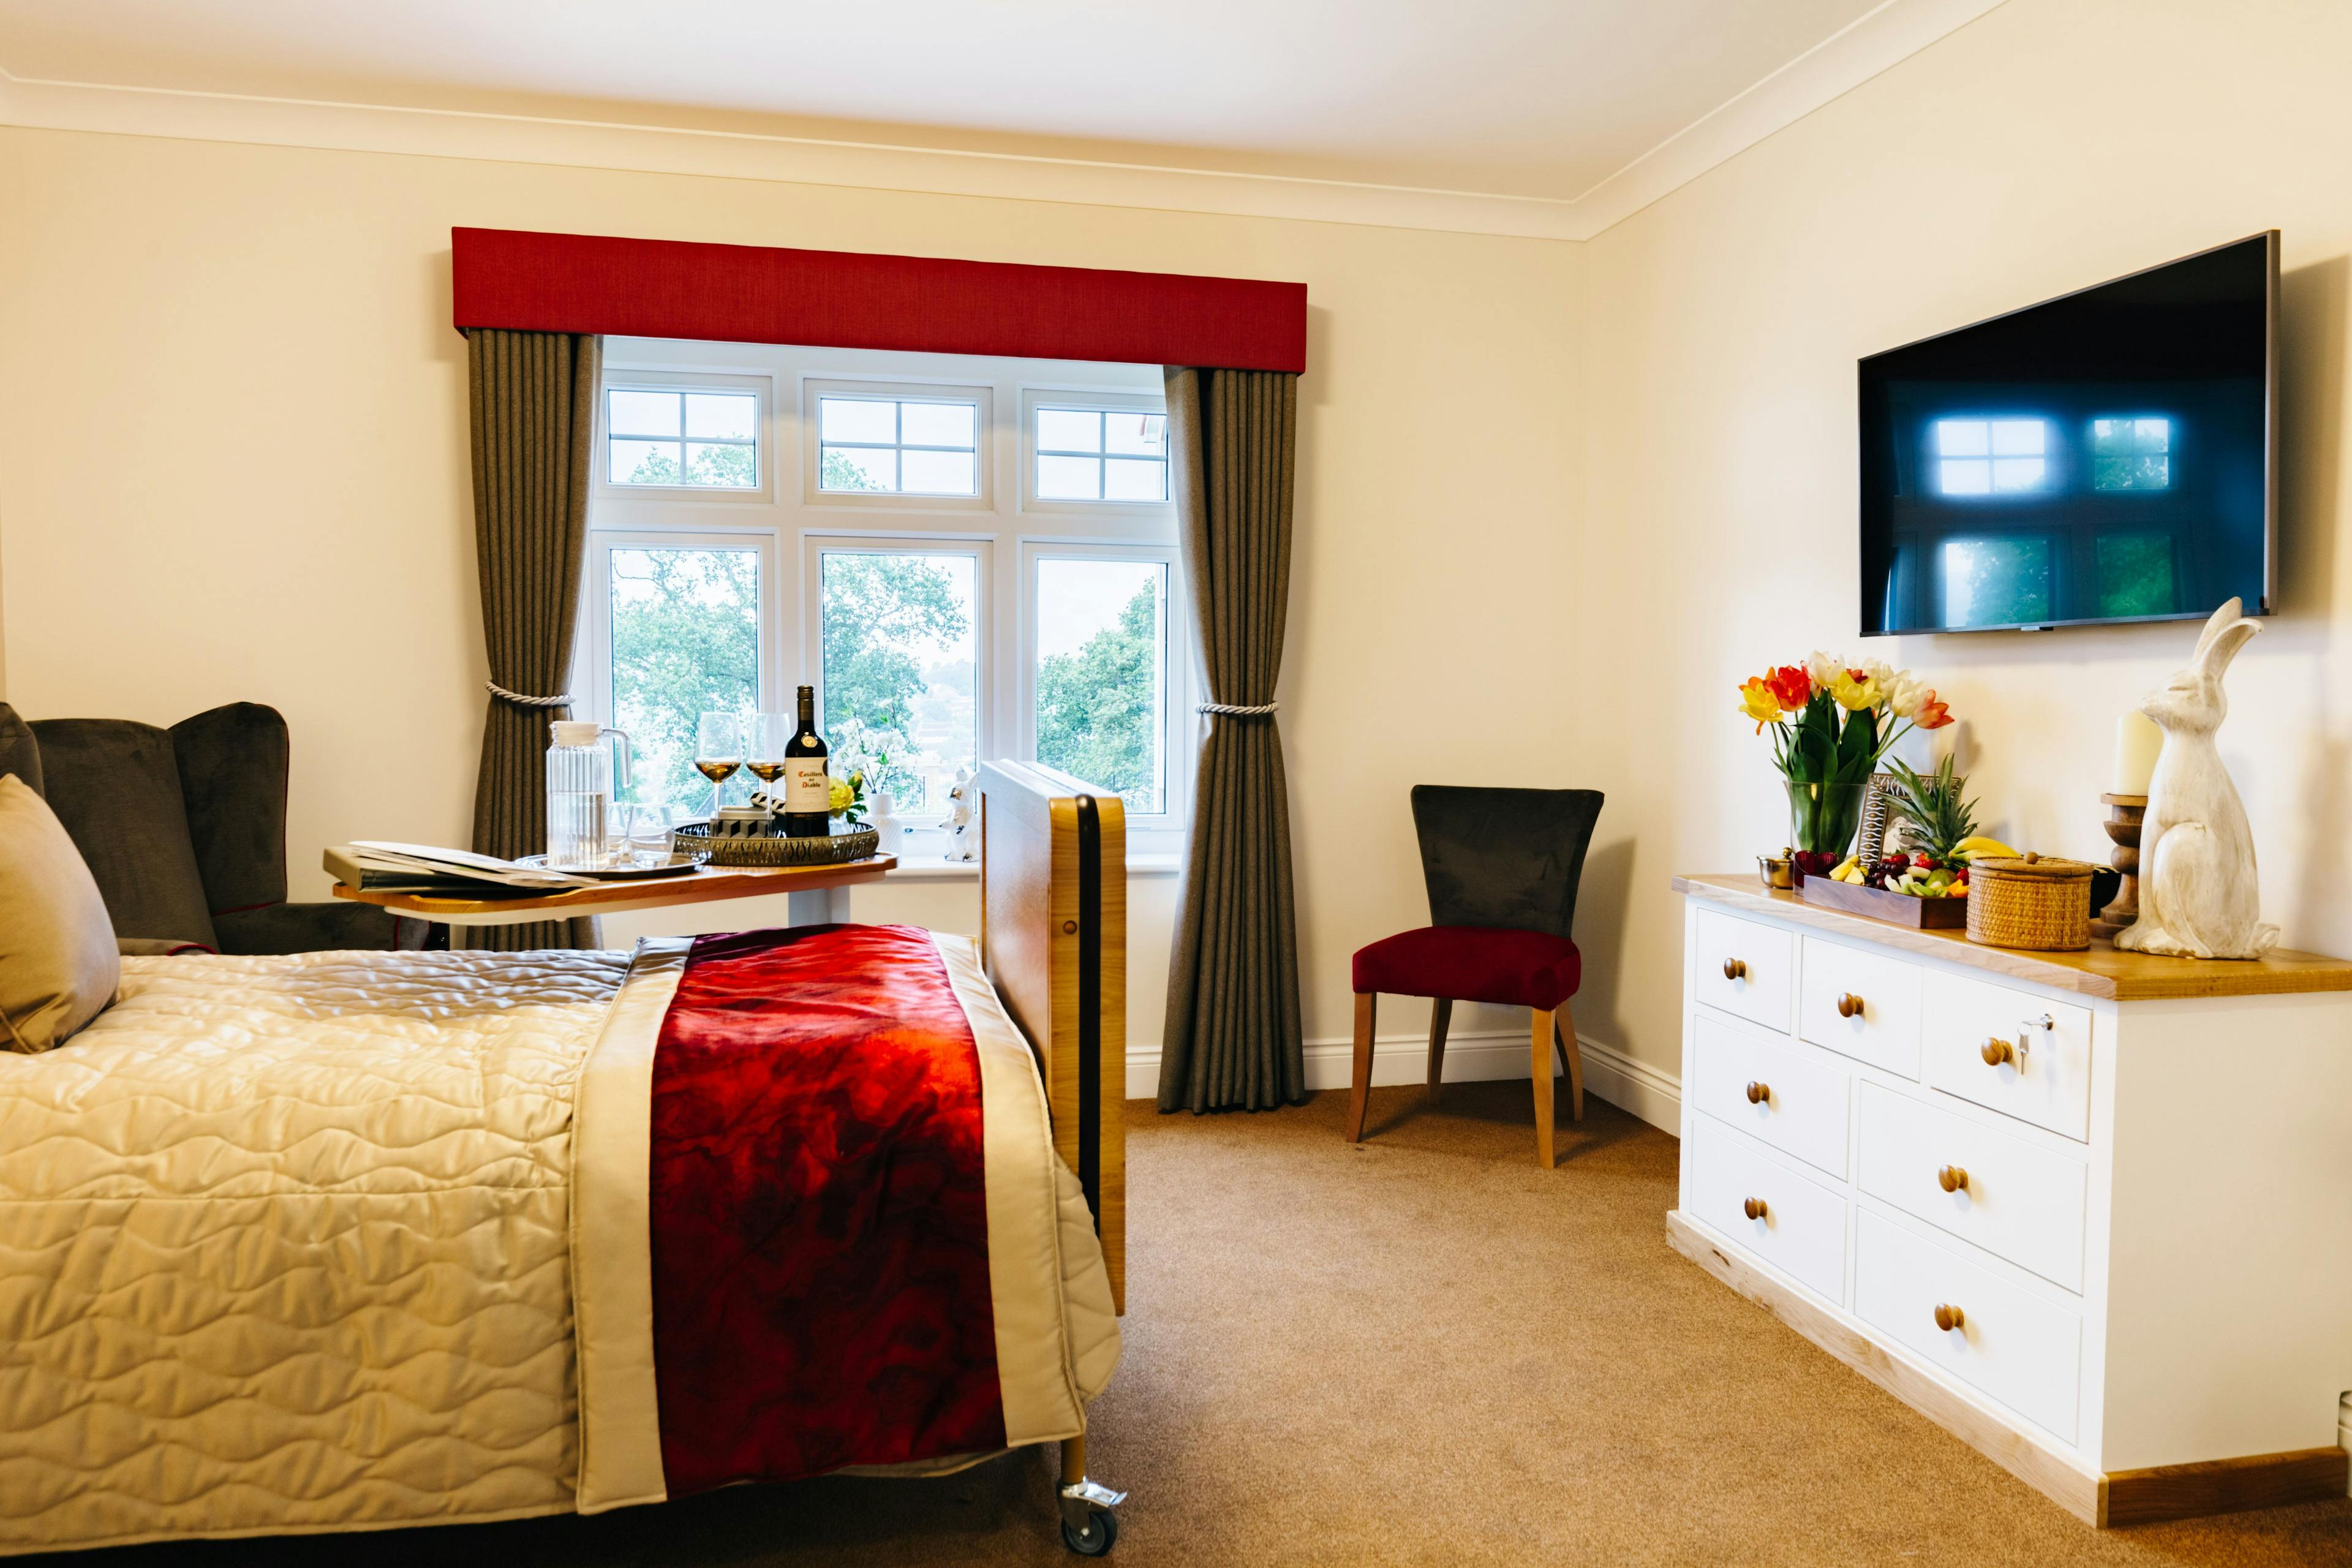 Bedroom at Raleigh Care Home in Exmouth, Devon